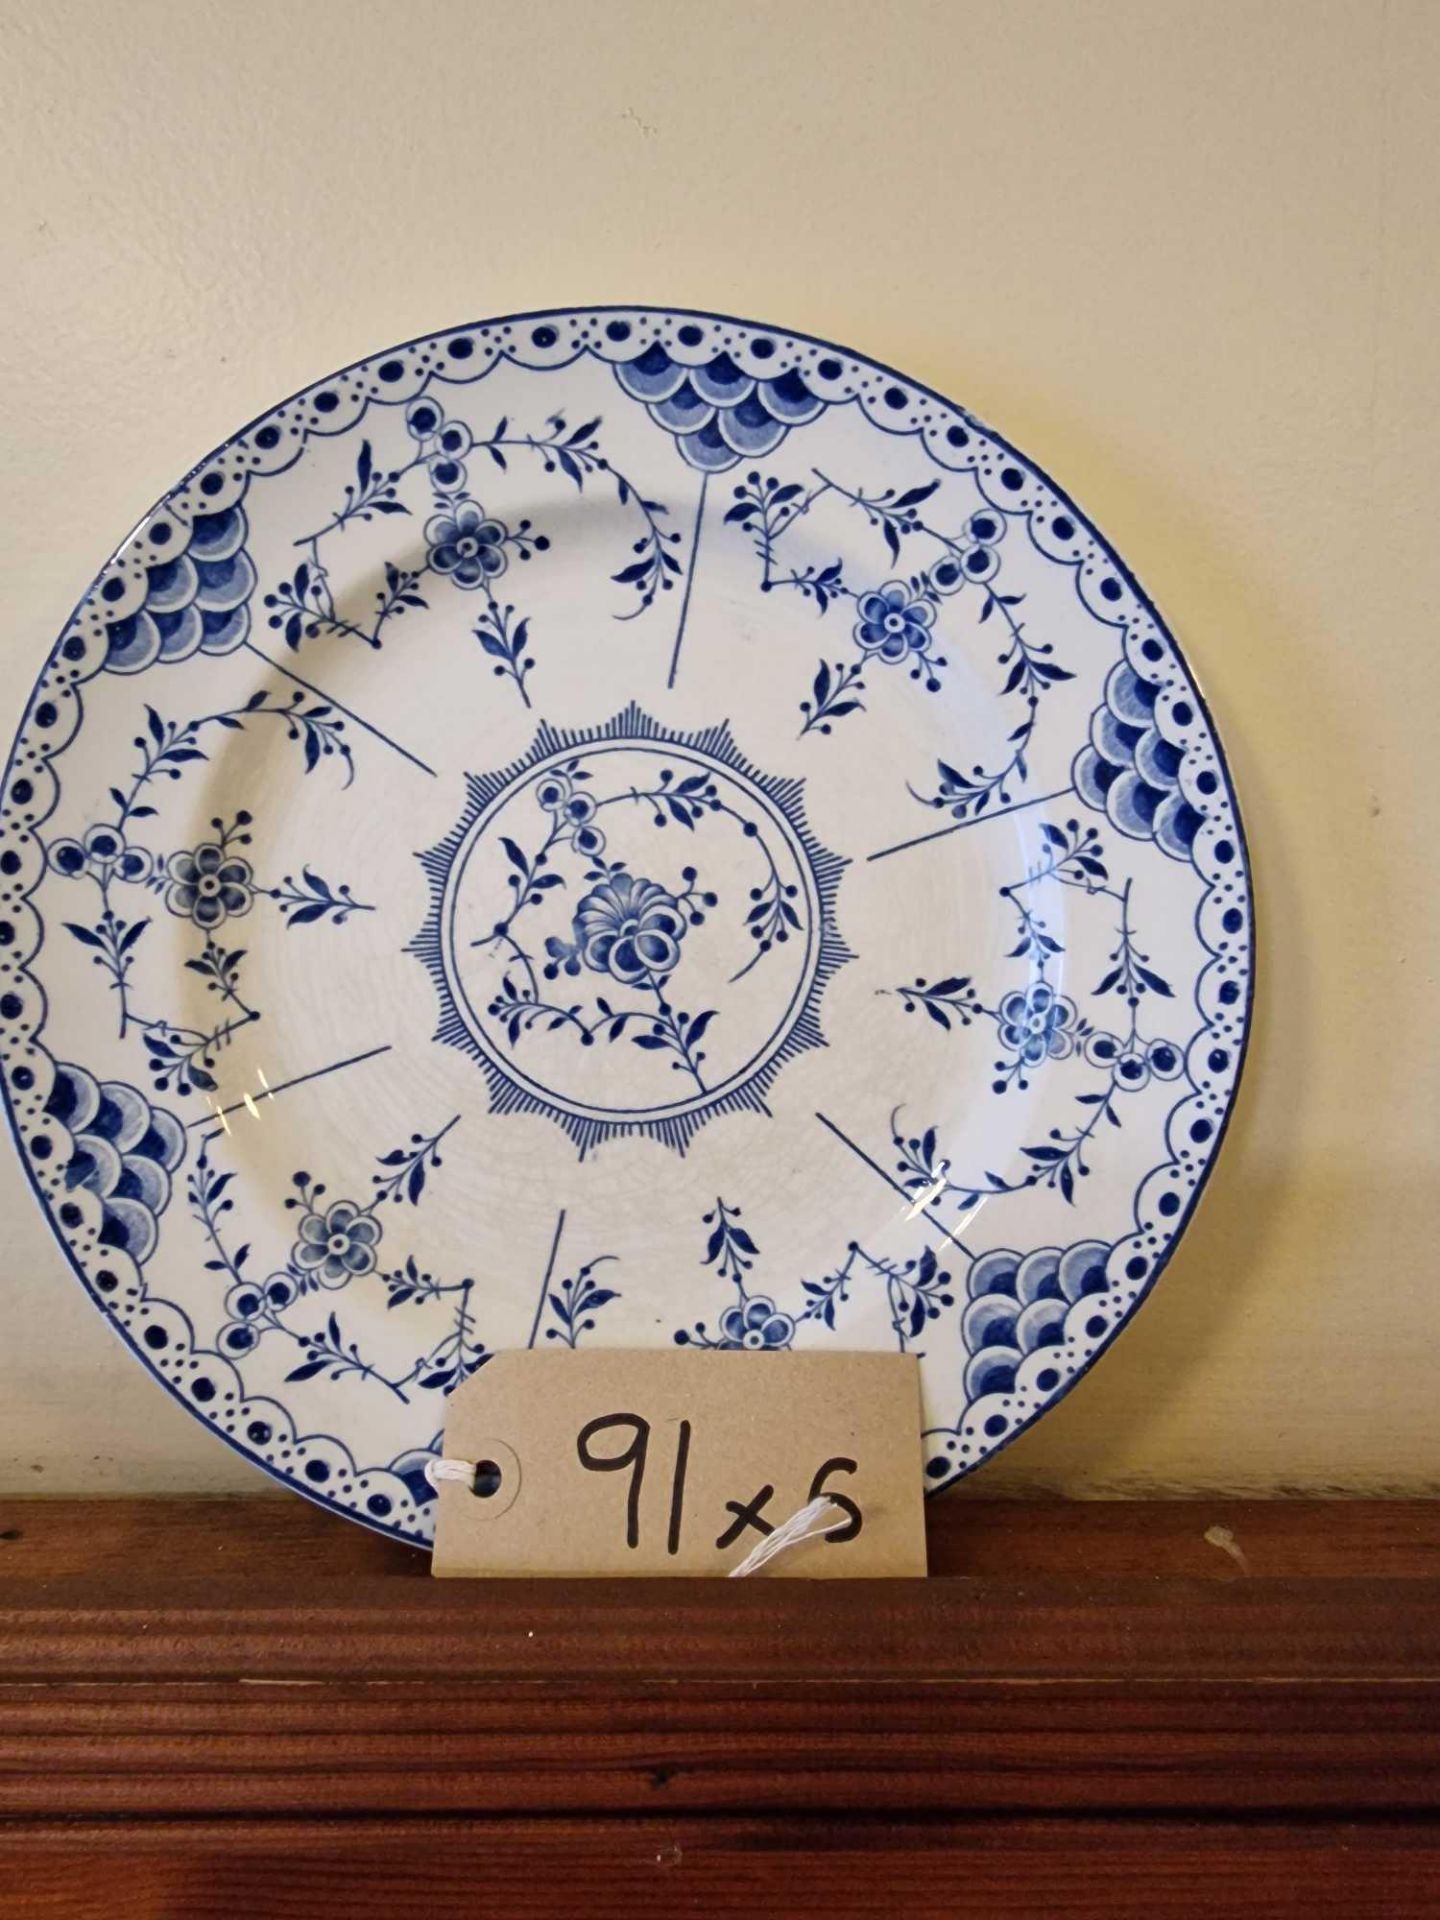 5 X Decorative Wall Plates Blue And White By Saxon And Snowdon Flood - Image 4 of 6